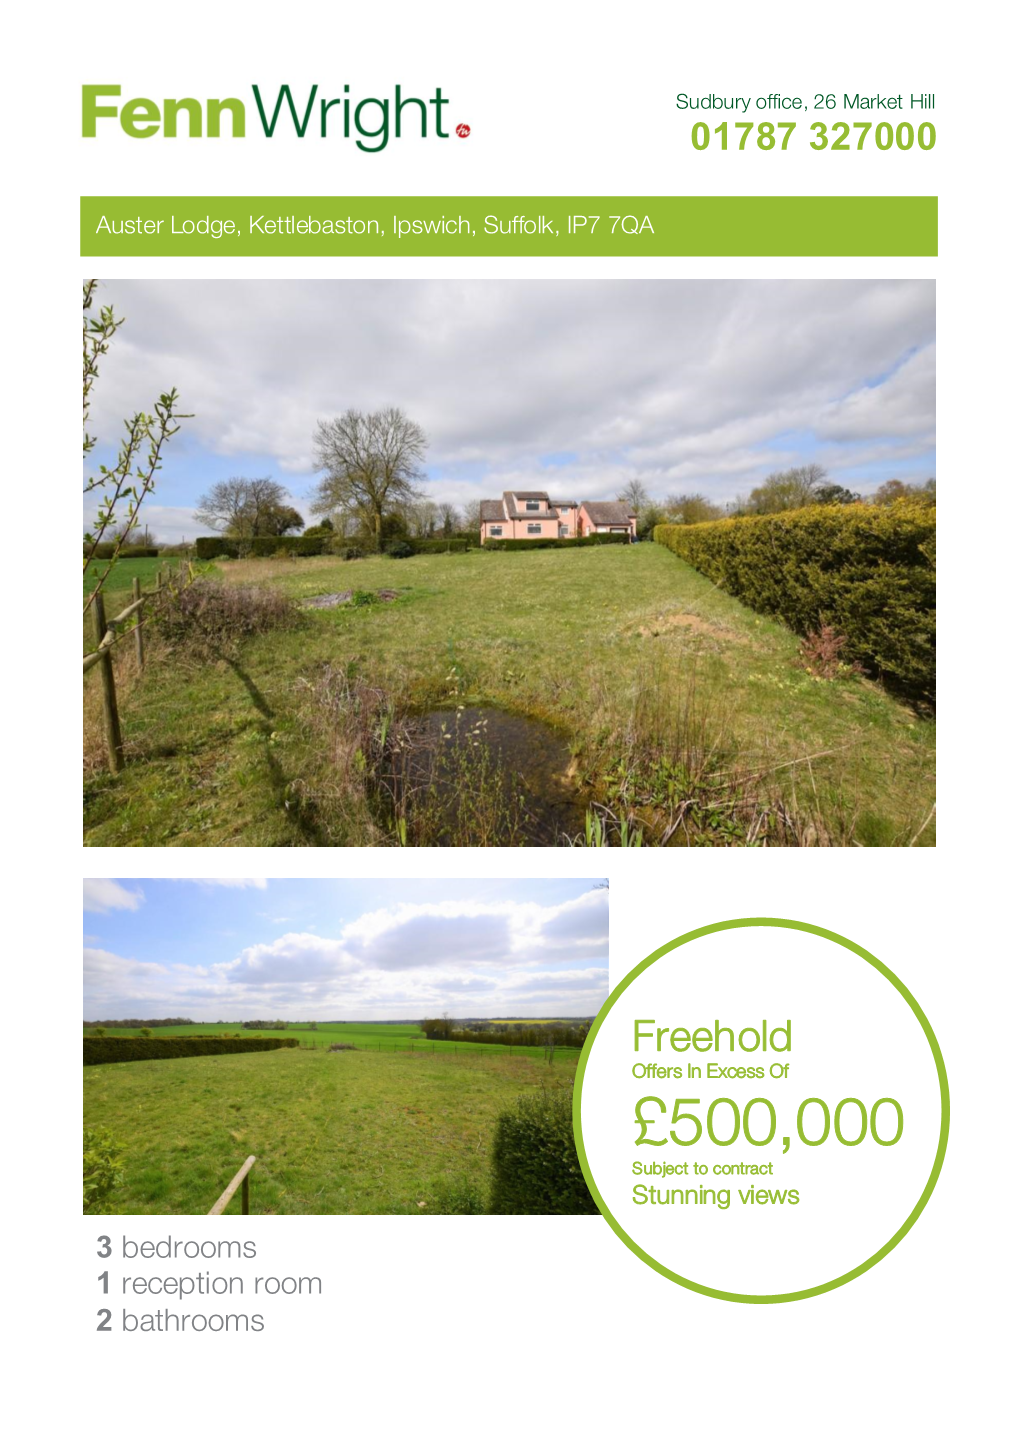 £500,000 Subject to Contract Stunning Views